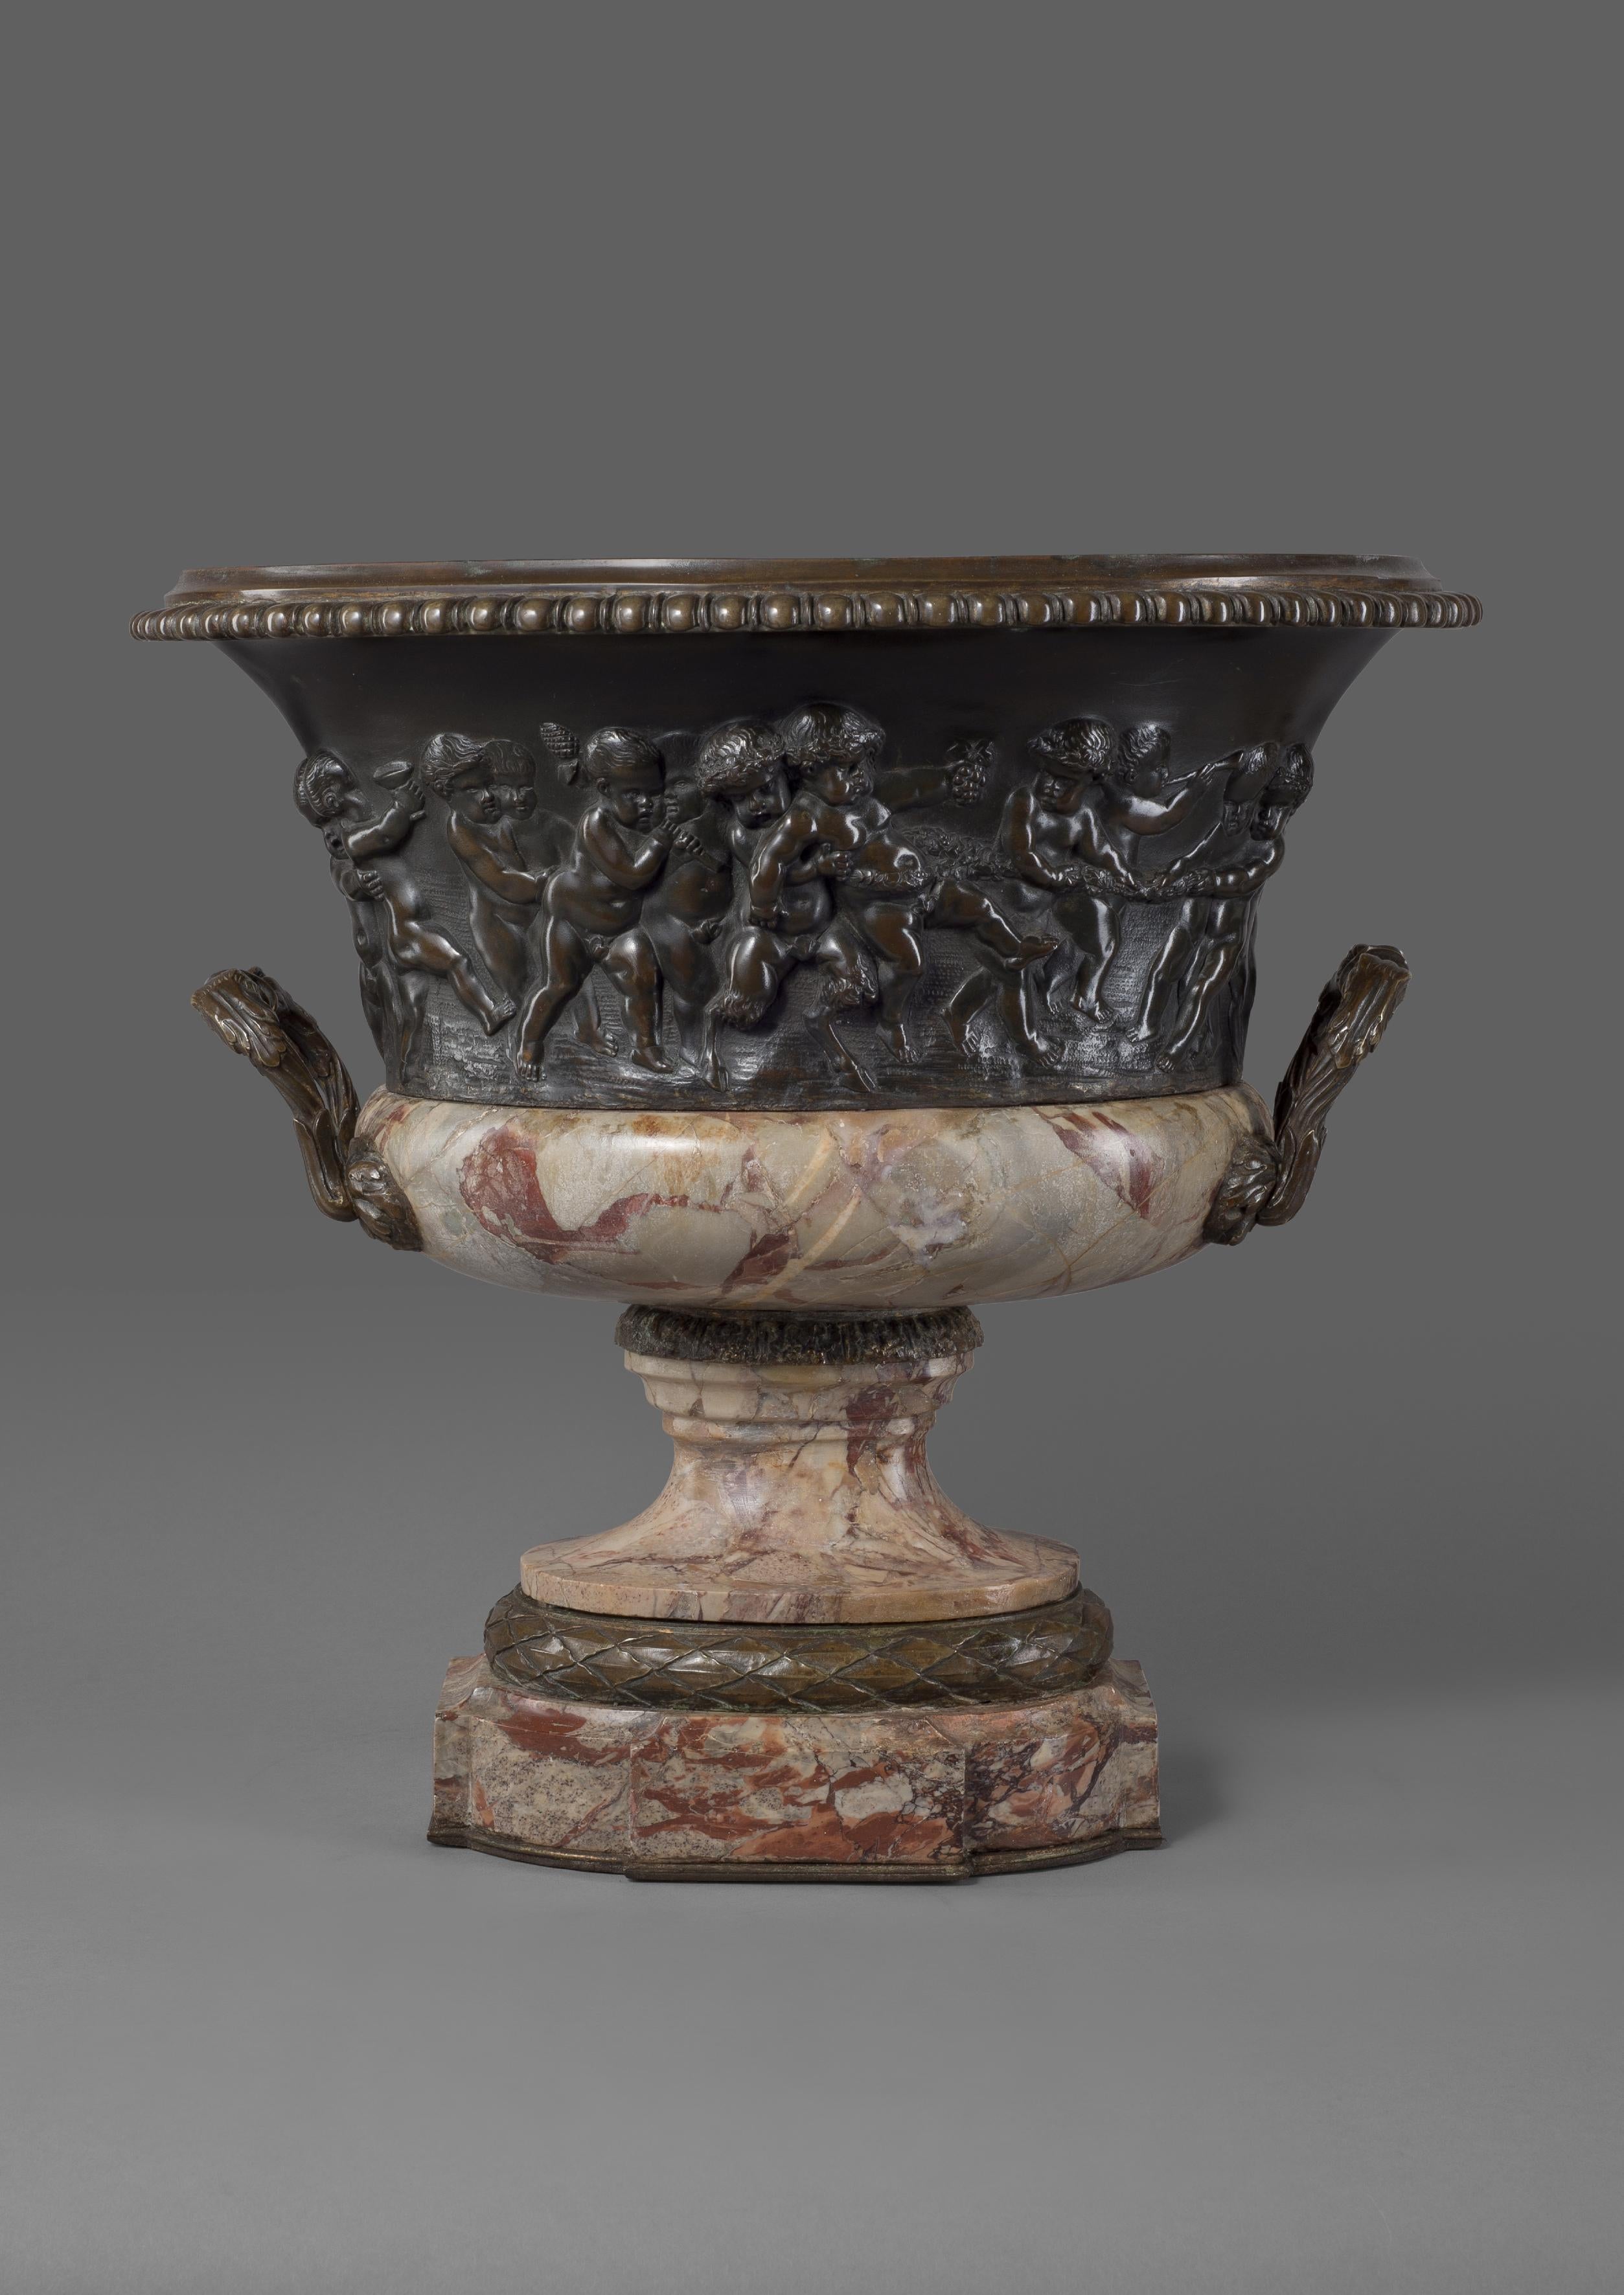 A Louis XVI style patinated bronze and marble jardinière, cast in relief with Bacchanalian Scenes Of Putti at Play, After Clodion.

French, circa 1870. 

The body of the jardinière or vase depicts a charming scene of putti at play in the manner